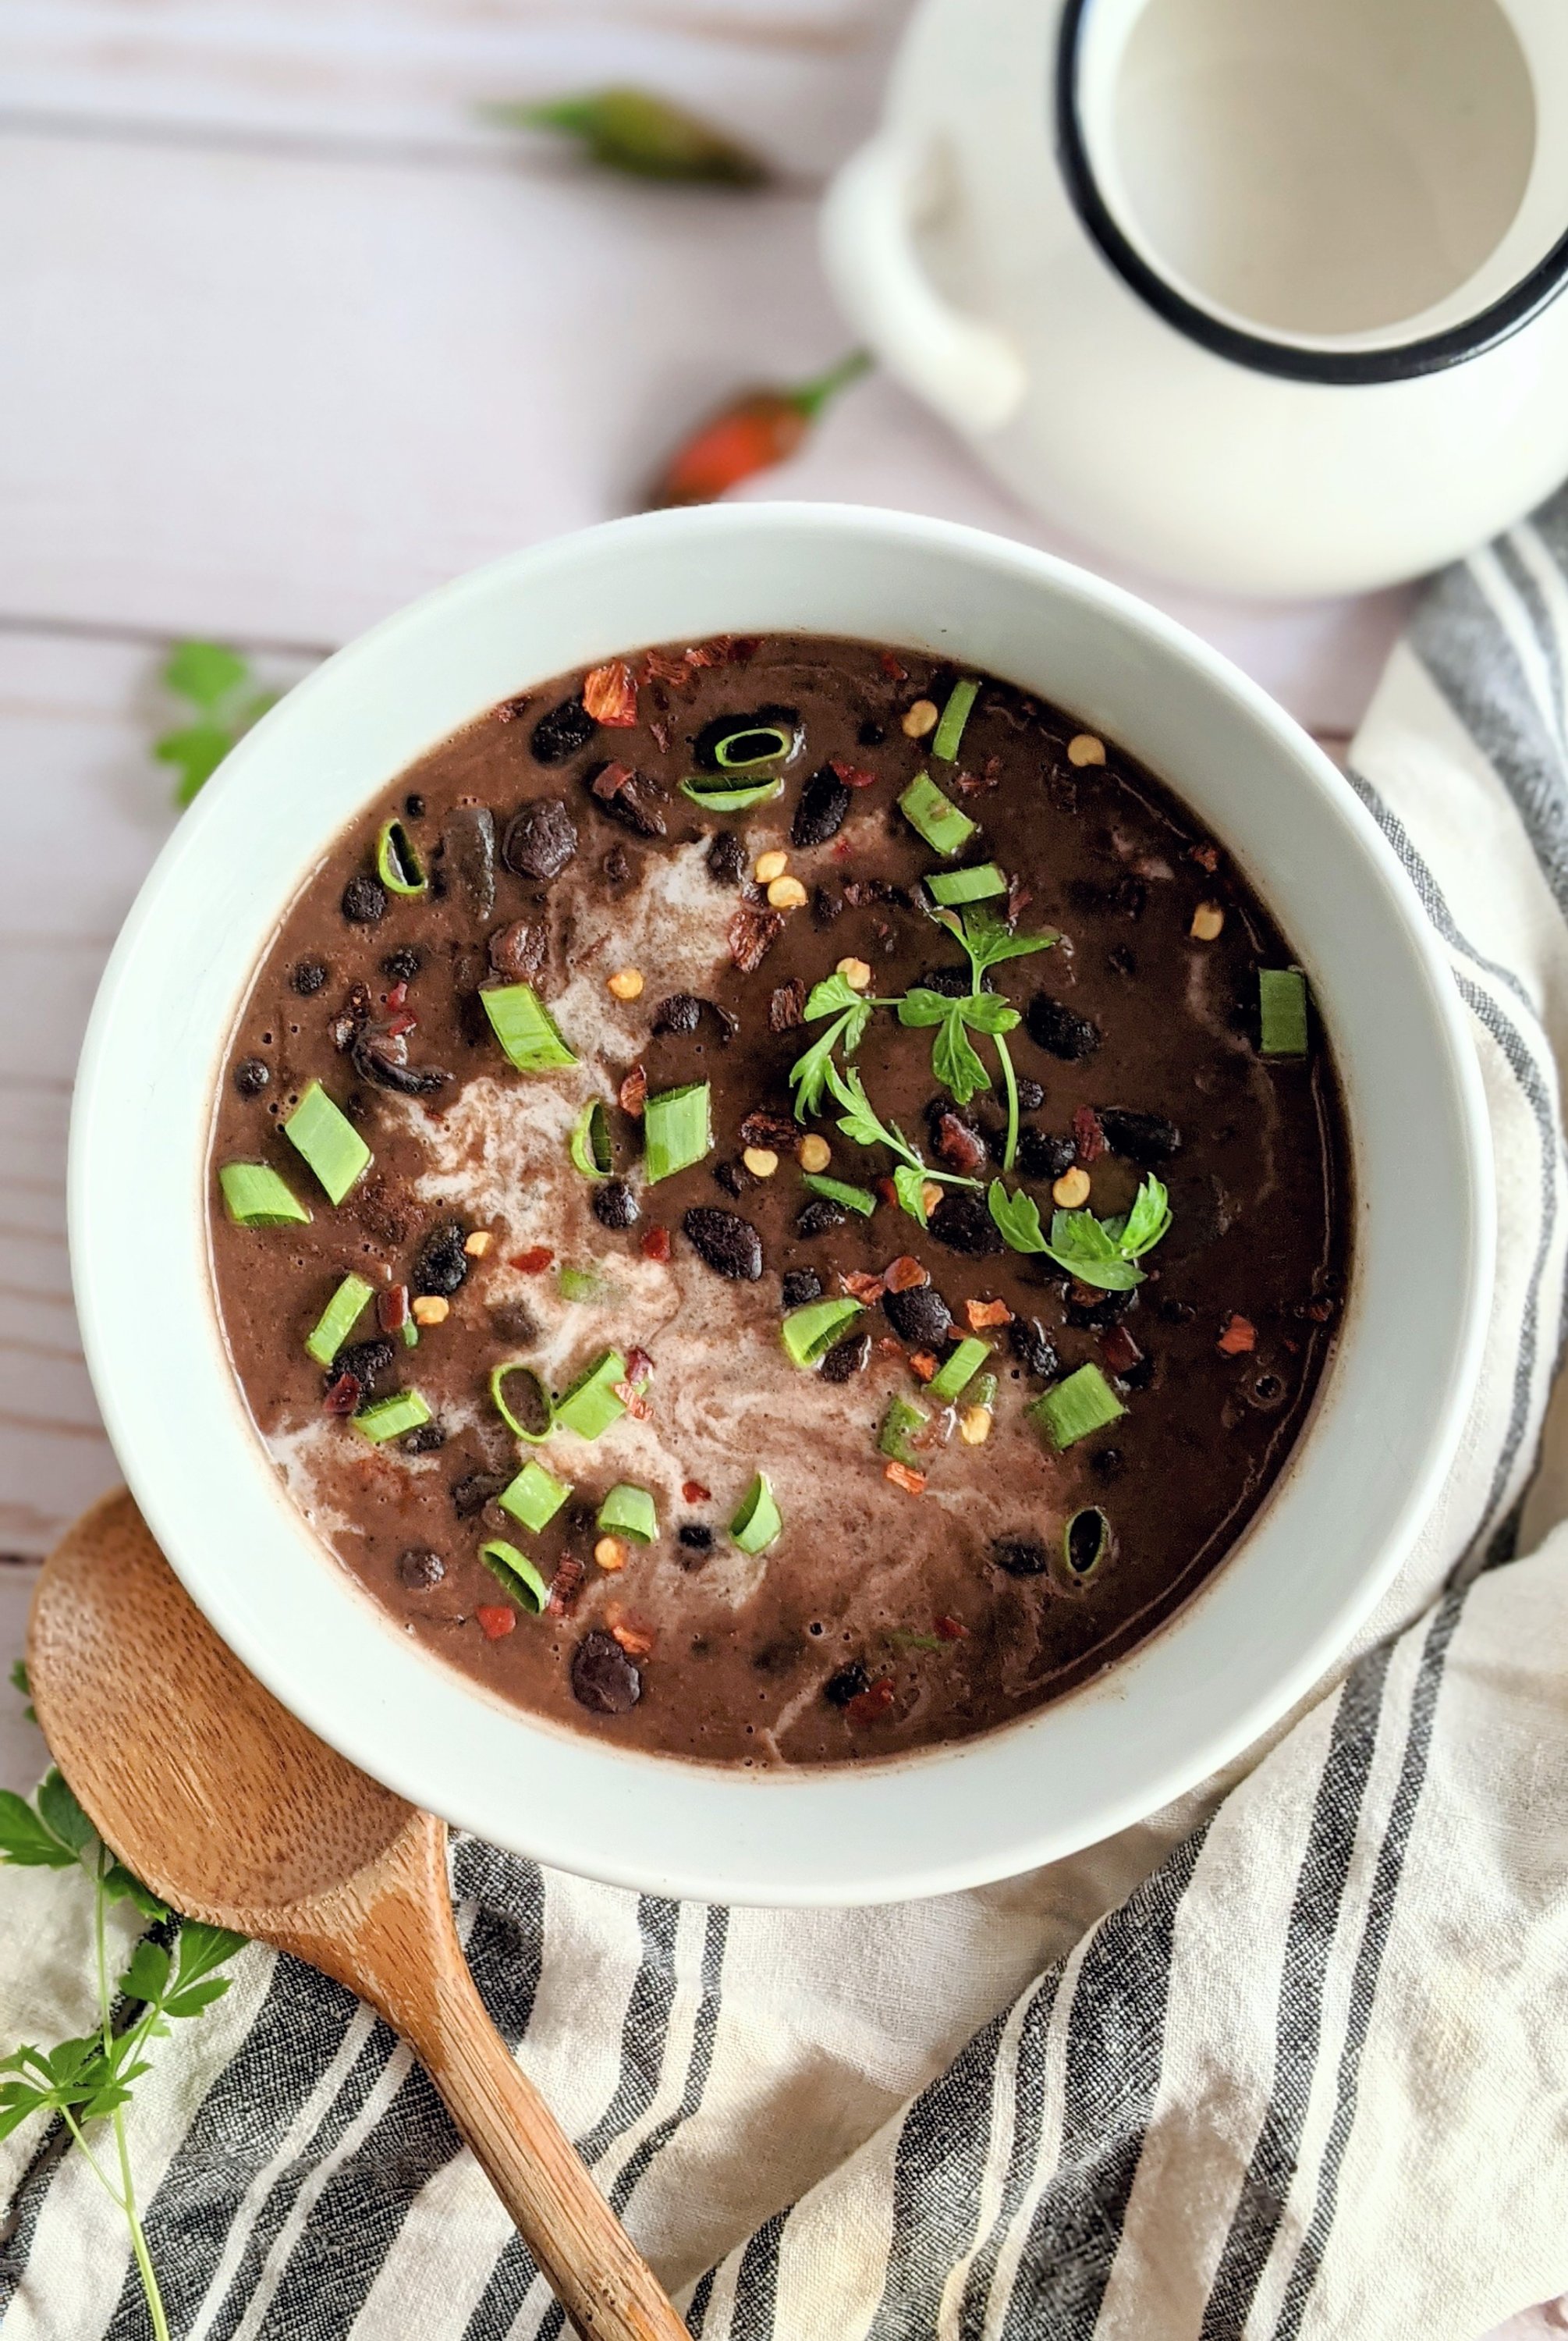 black beans and coconut milk soup recipe gluten free creamy dairy free bean soup without milk no dairy creamy soups gluten free black bean soup with coconut milk vegan vegetarian meal prep with black beans